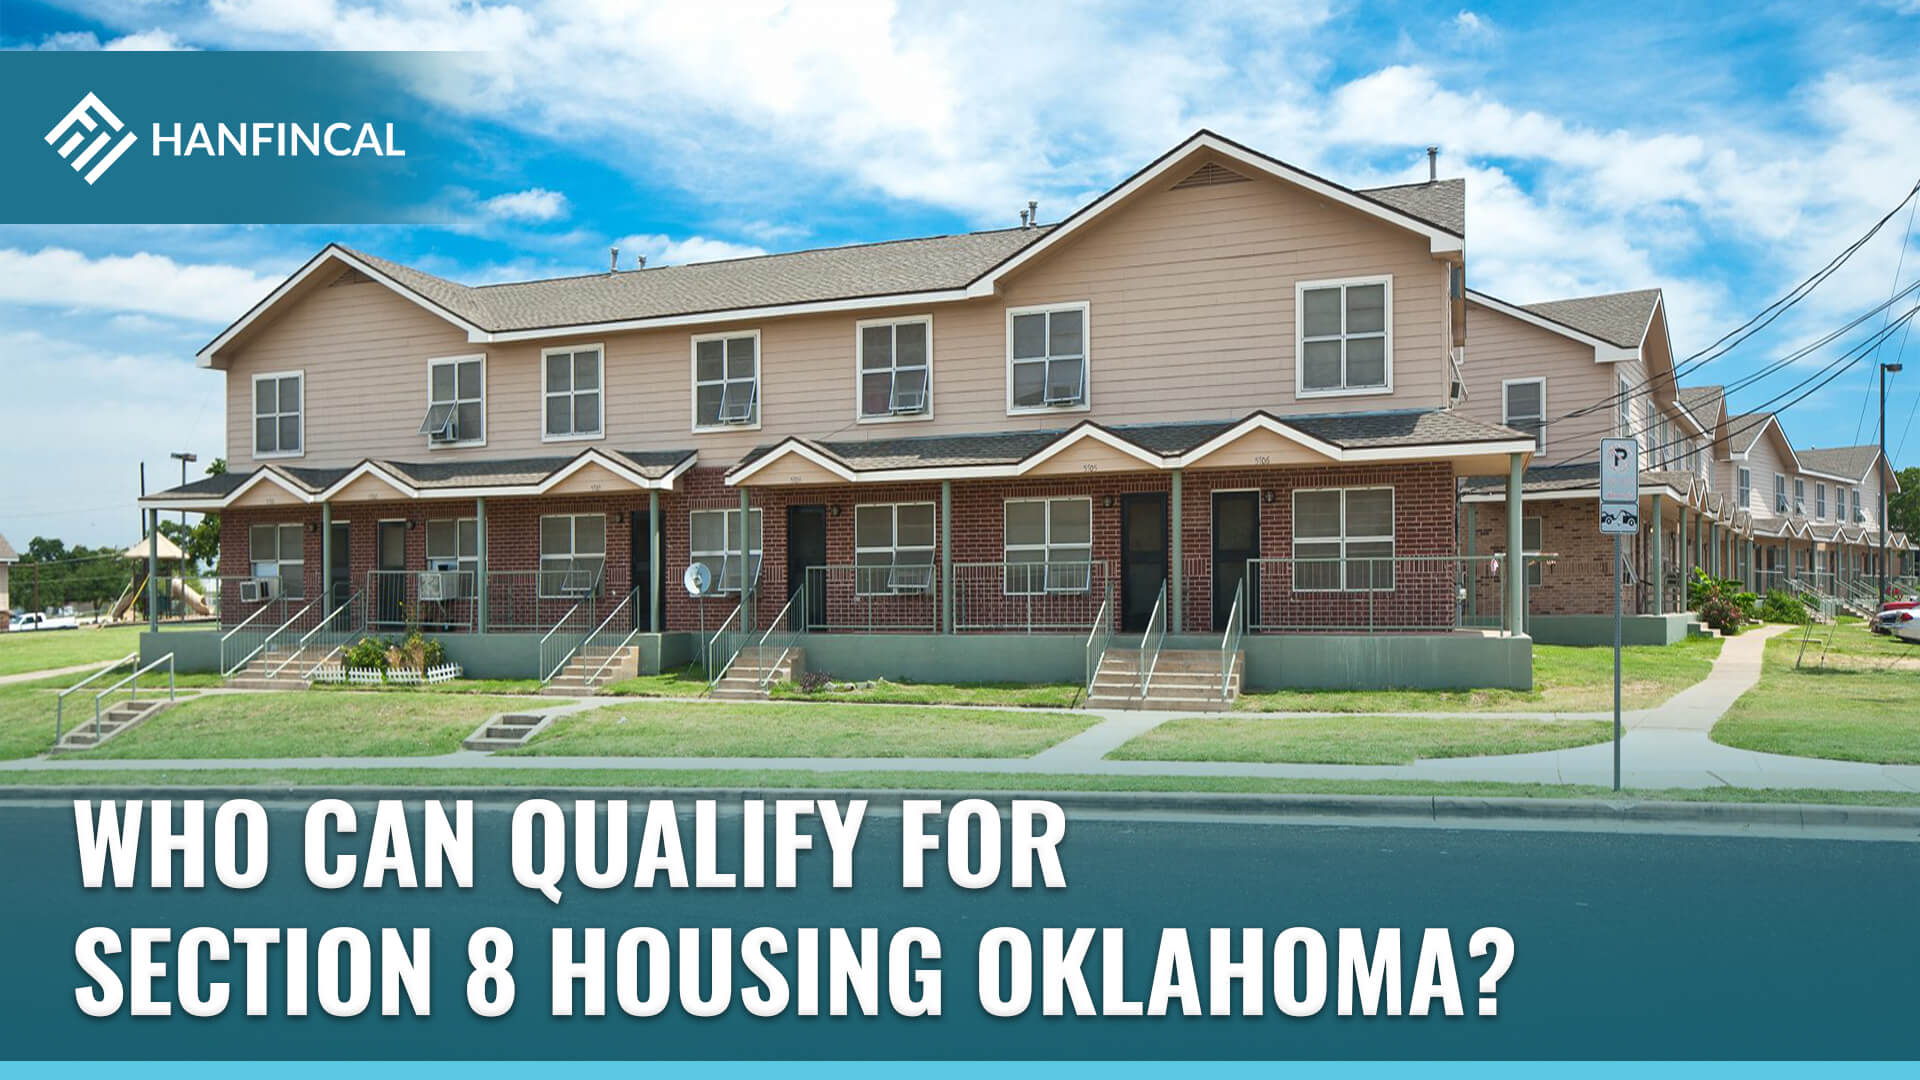 Who can qualify for Section 8 Housing in Oklahoma?